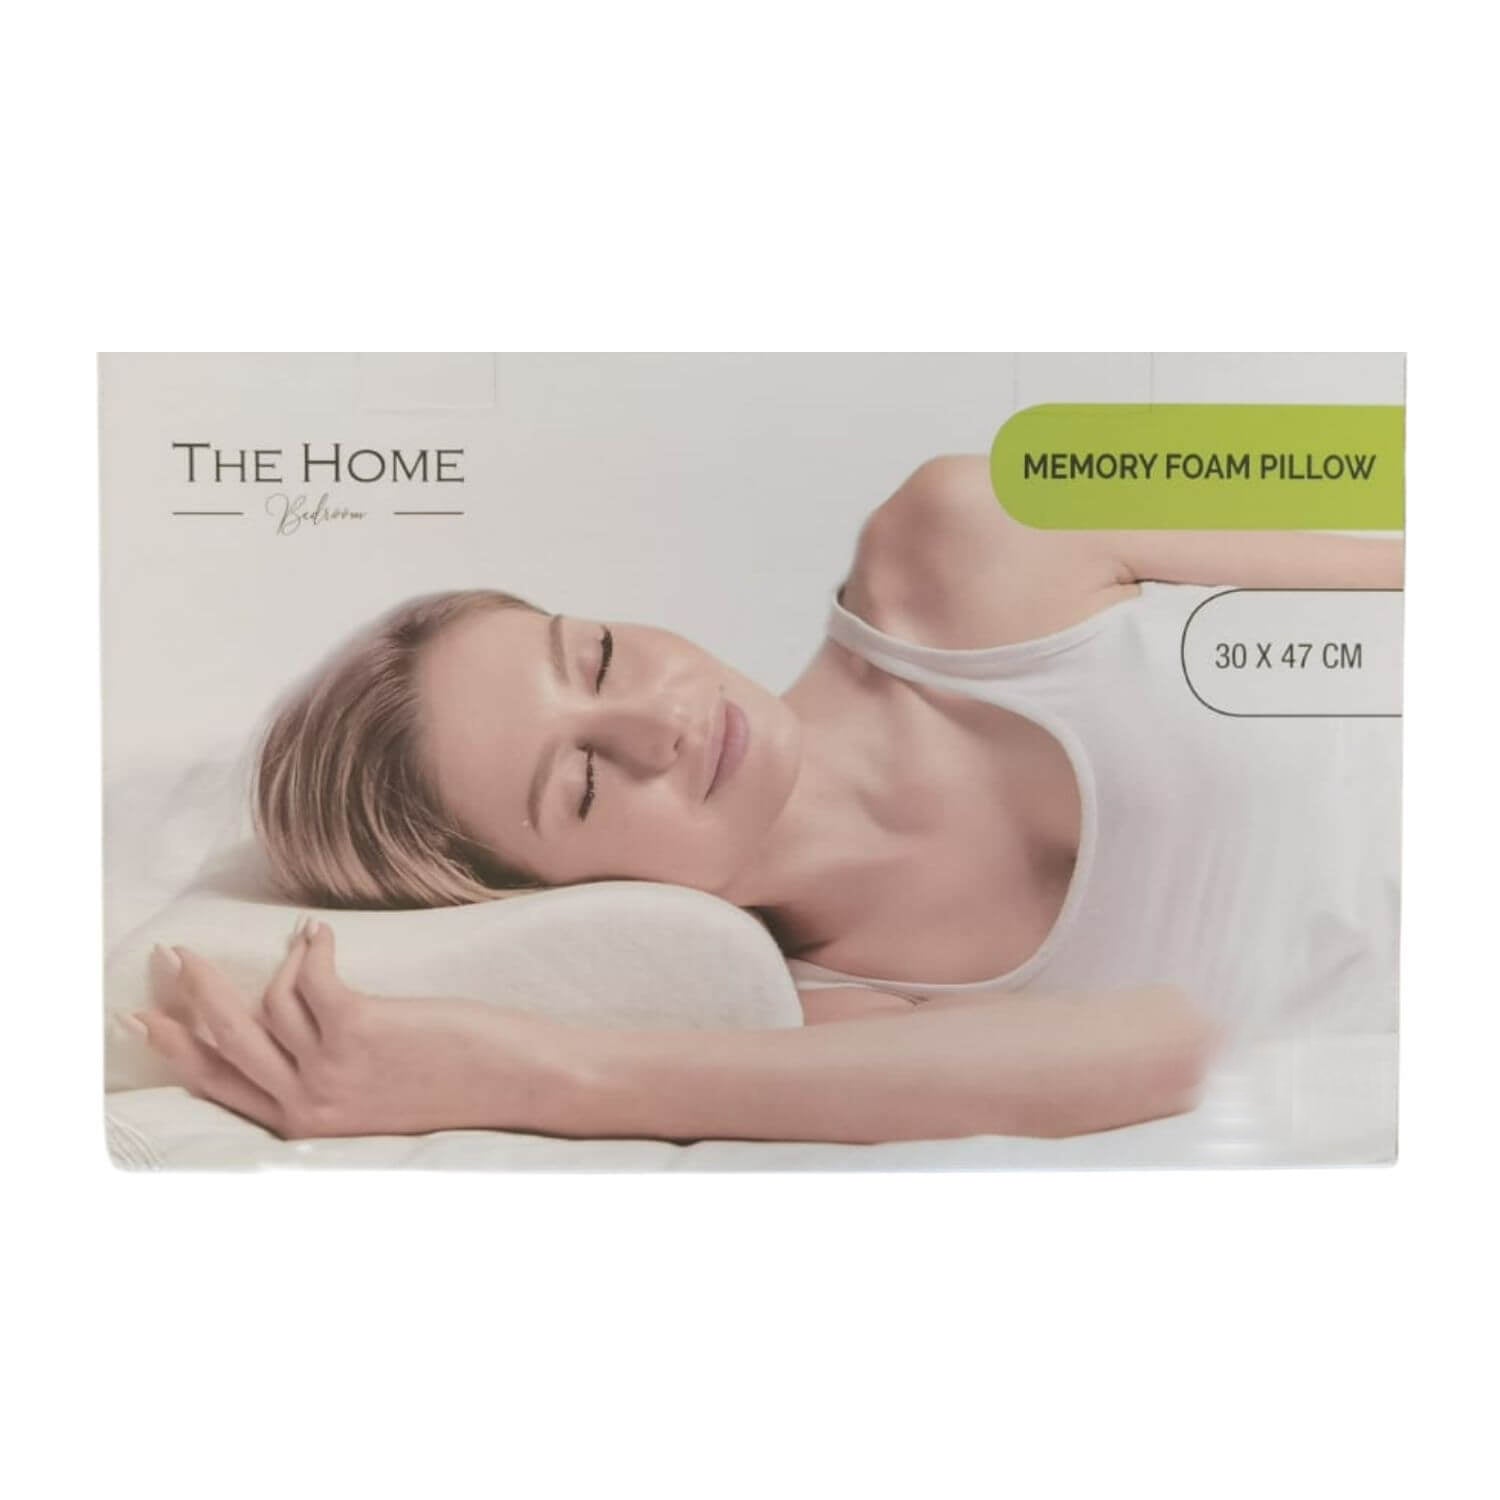 The Home Bedroom Memory Foam Pillow 1 Shaws Department Stores